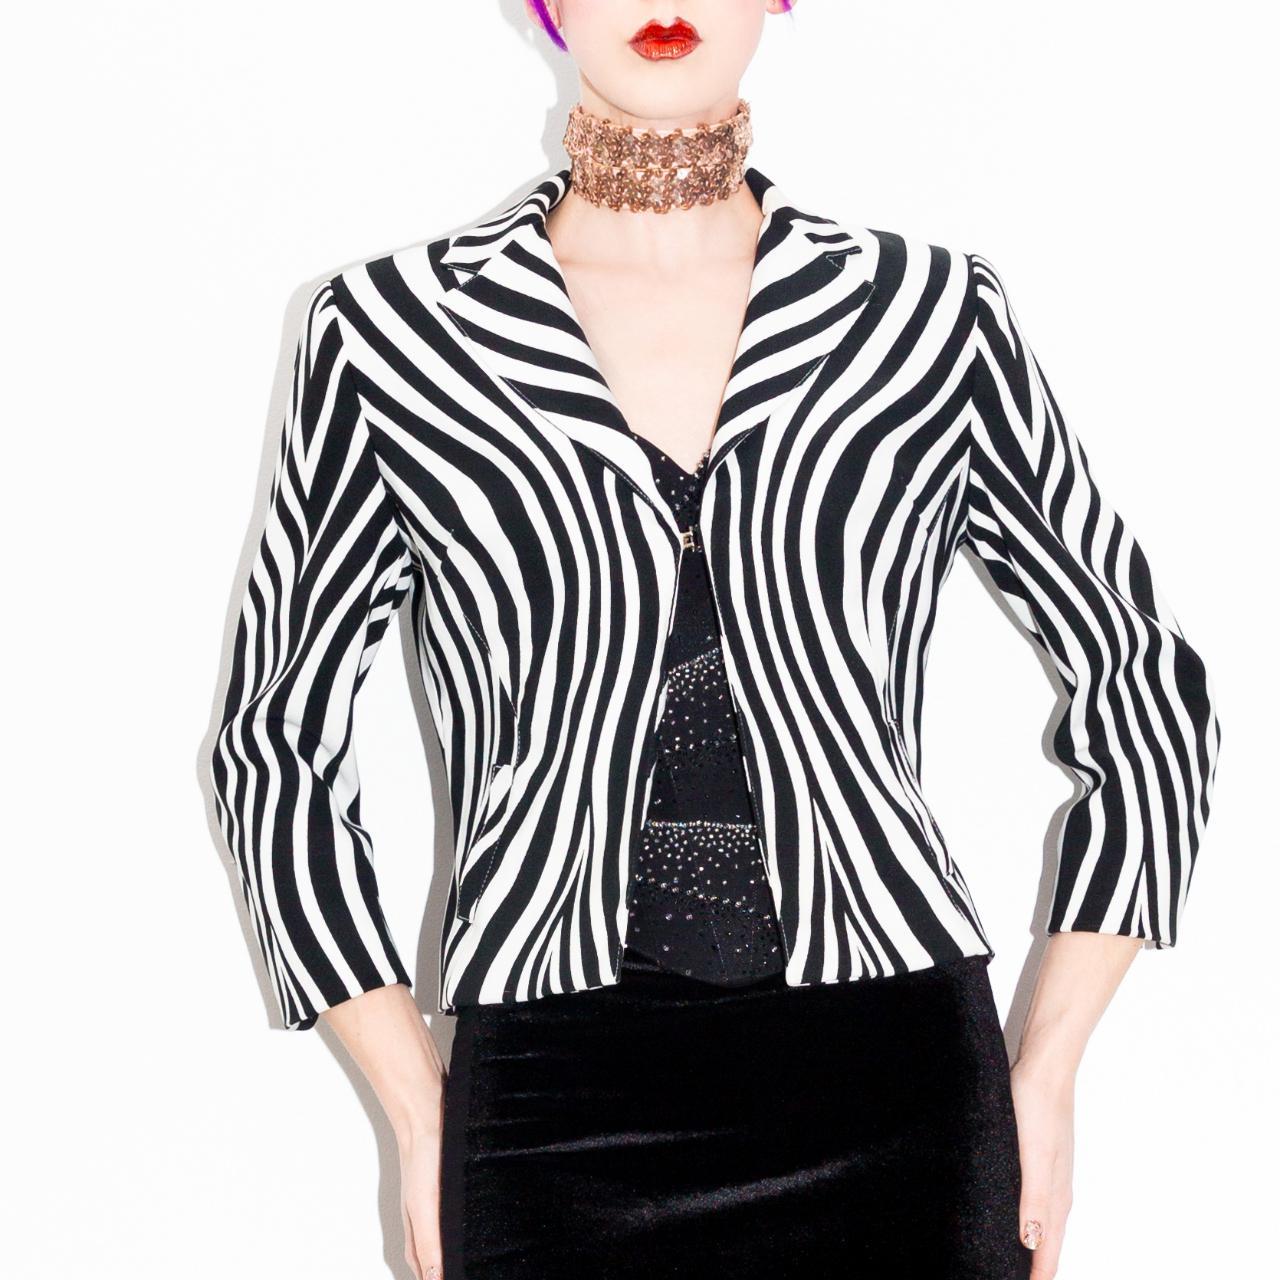 Product Image 1 - CRUELLA EAT YOUR HEART OUT
Black